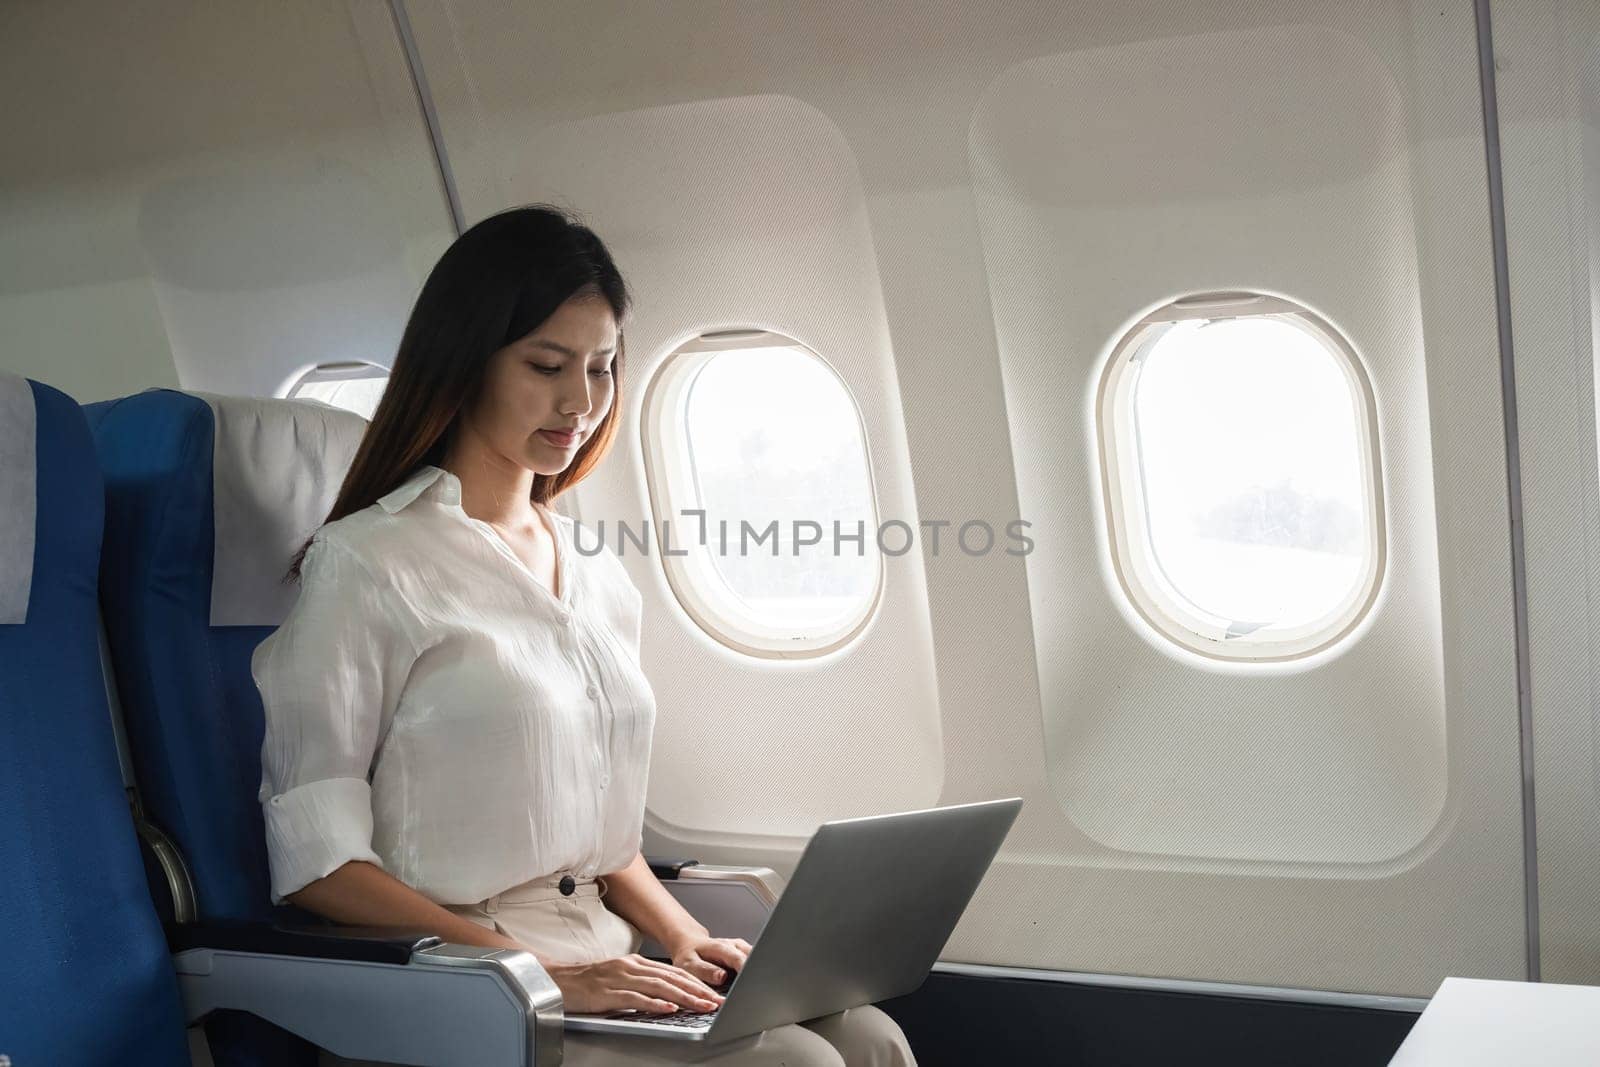 Asian woman working on laptop in airplane seat. Concept of air travel, remote work, and in-flight productivity.